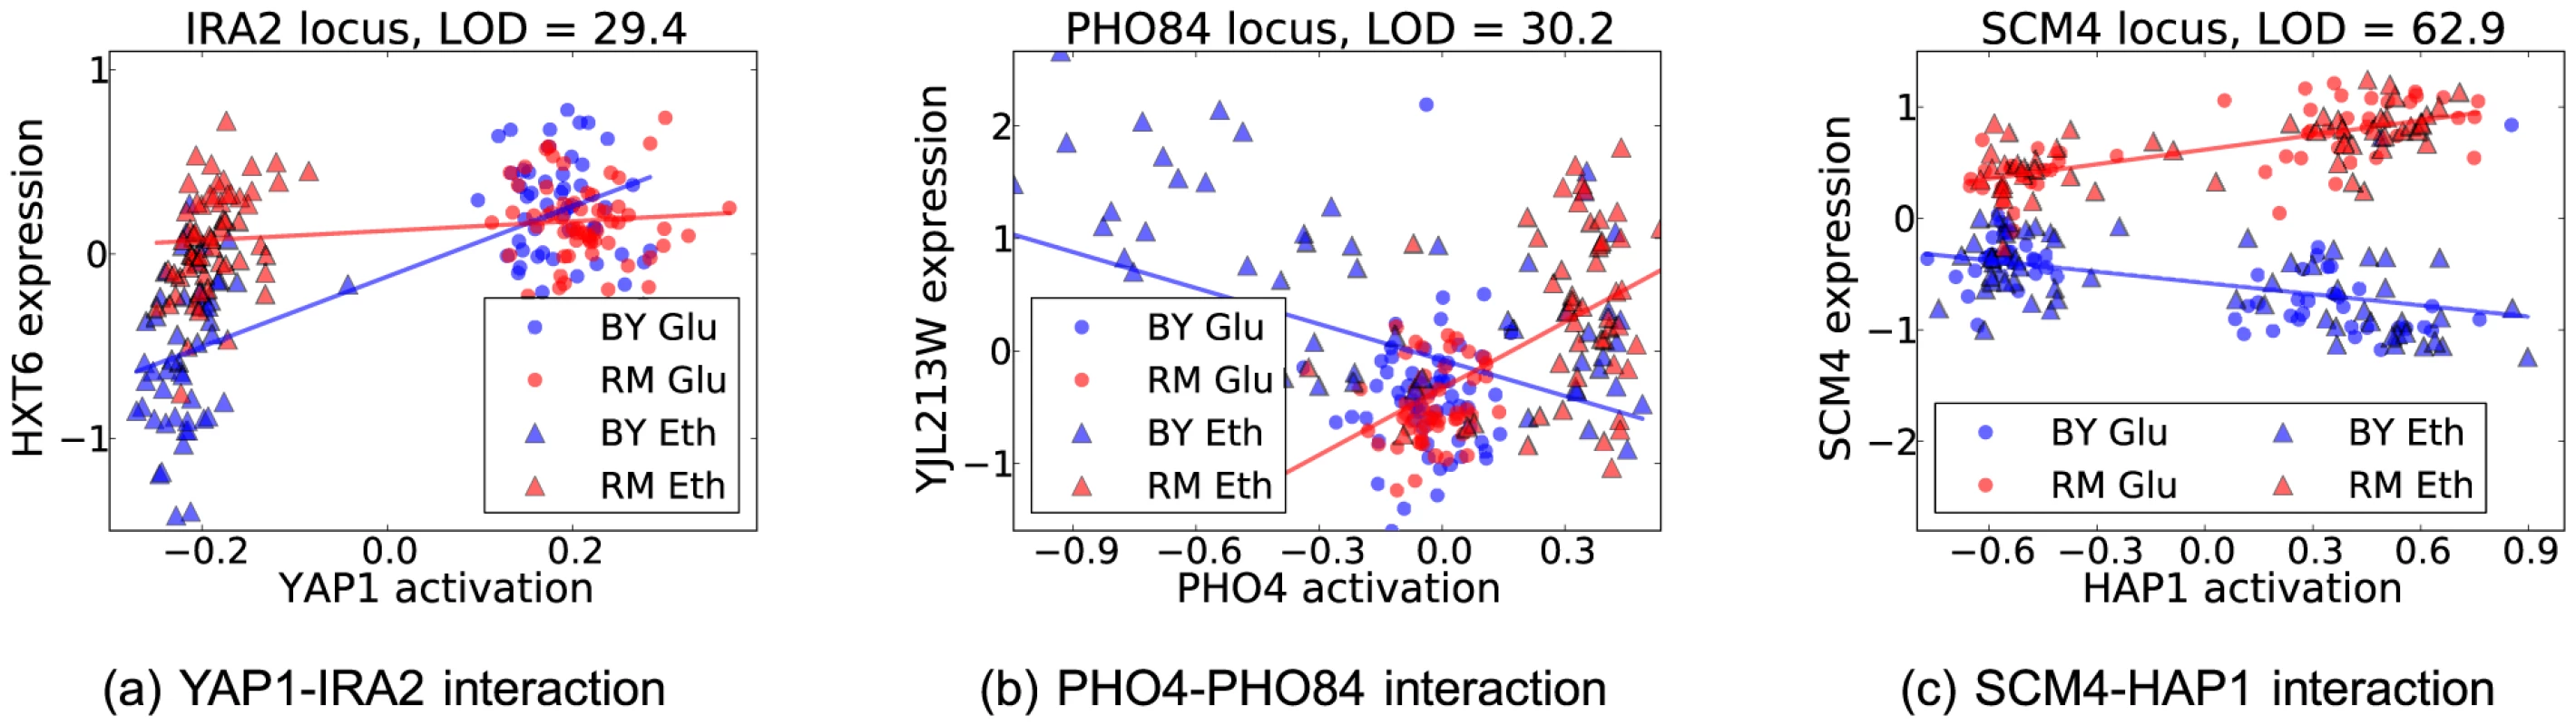 Three broad classes of interaction effects between locus genotype and transcription factor activation affecting gene expression (for details see text).